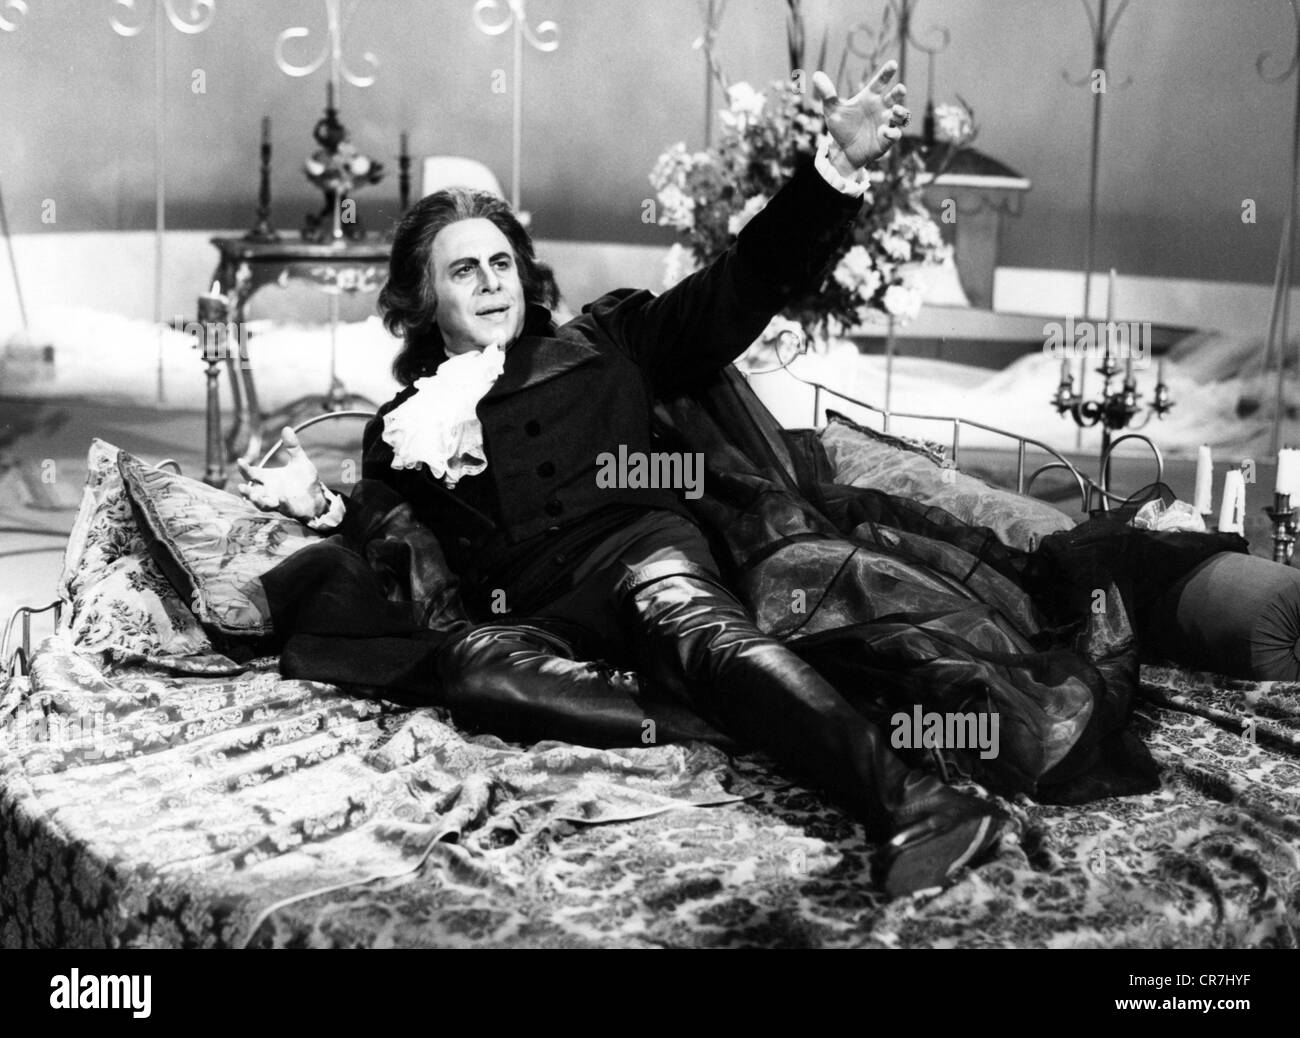 London, George, 30.5.1920 - 24.3.1985, Canadian opera singer (bass-baritone), singing a scene from the opera 'The Tales of Hoffmann' by Jacques Offenbach, TV-Show 'Erkennen Sie die Melodie?', West Germany, 6.10.1973, Stock Photo